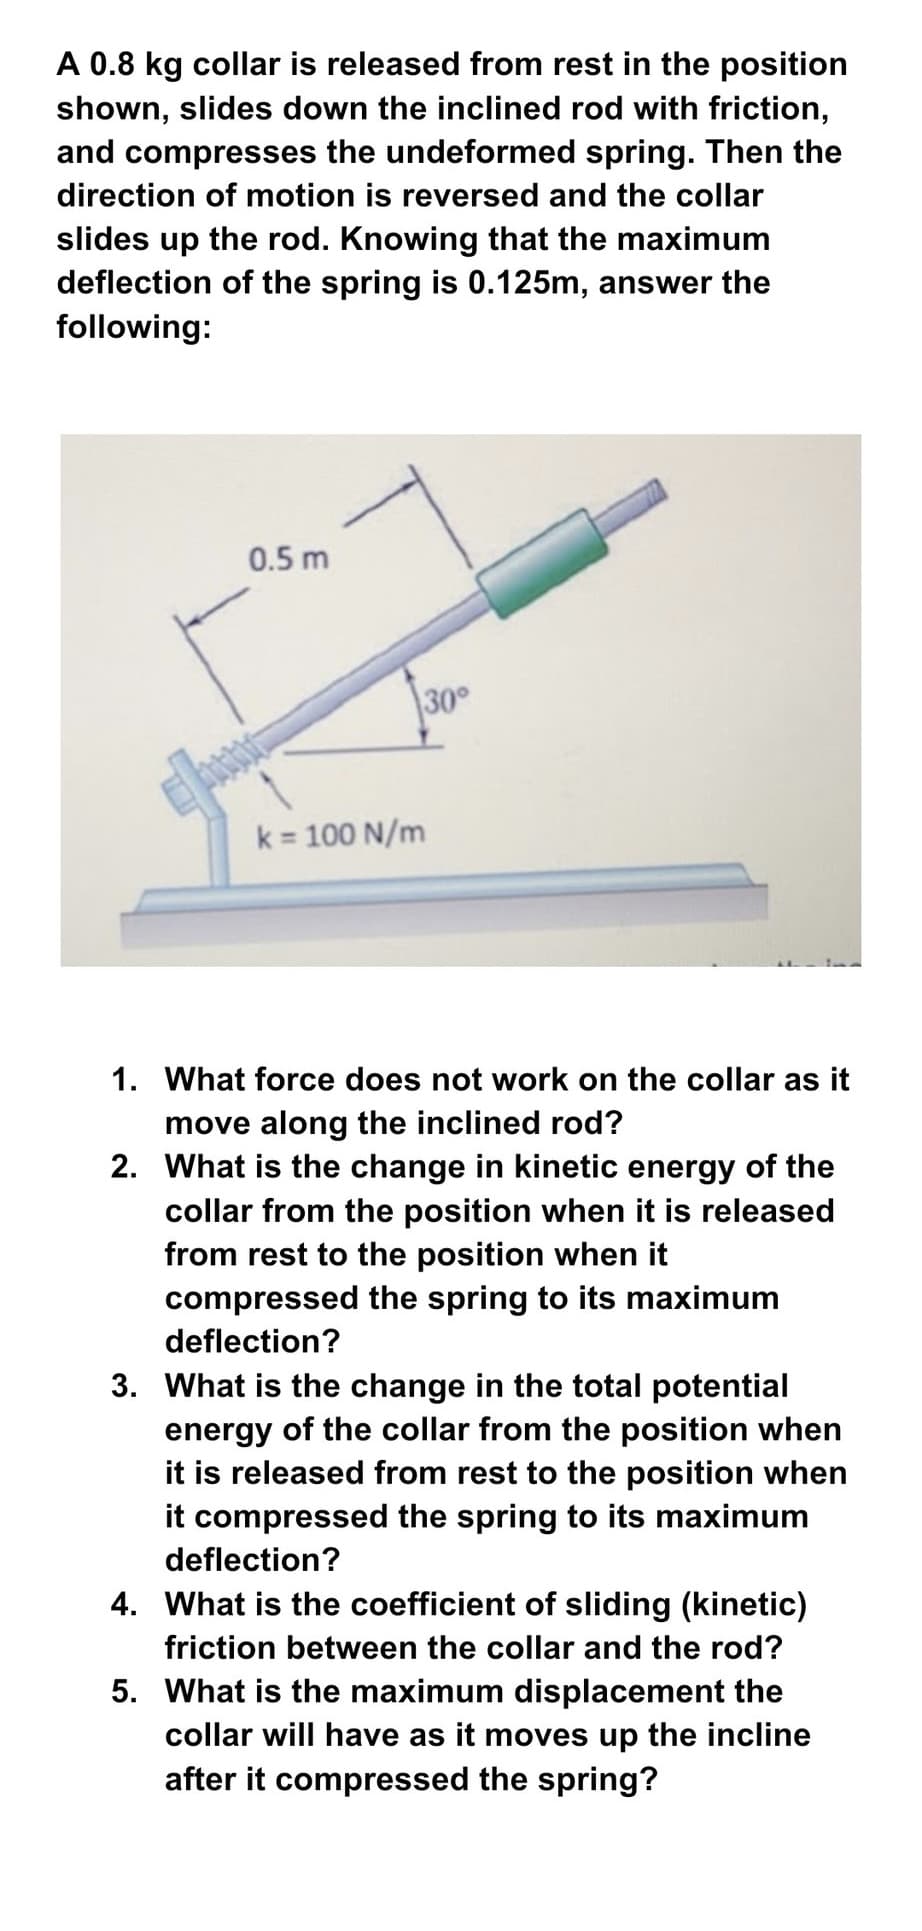 A 0.8 kg collar is released from rest in the position
shown, slides down the inclined rod with friction,
and compresses the undeformed spring. Then the
direction of motion is reversed and the collar
slides up the rod. Knowing that the maximum
deflection of the spring is 0.125m, answer the
following:
0.5 m
30°
k = 100 N/m
1. What force does not work on the collar as it
move along the inclined rod?
2. What is the change in kinetic energy of the
collar from the position when it is released
from rest to the position when it
compressed the spring to its maximum
deflection?
3. What is the change in the total potential
energy of the collar from the position when
it is released from rest to the position when
it compressed the spring to its maximum
deflection?
4. What is the coefficient of sliding (kinetic)
friction between the collar and the rod?
5. What is the maximum displacement the
collar will have as it moves up the incline
after it compressed the spring?
